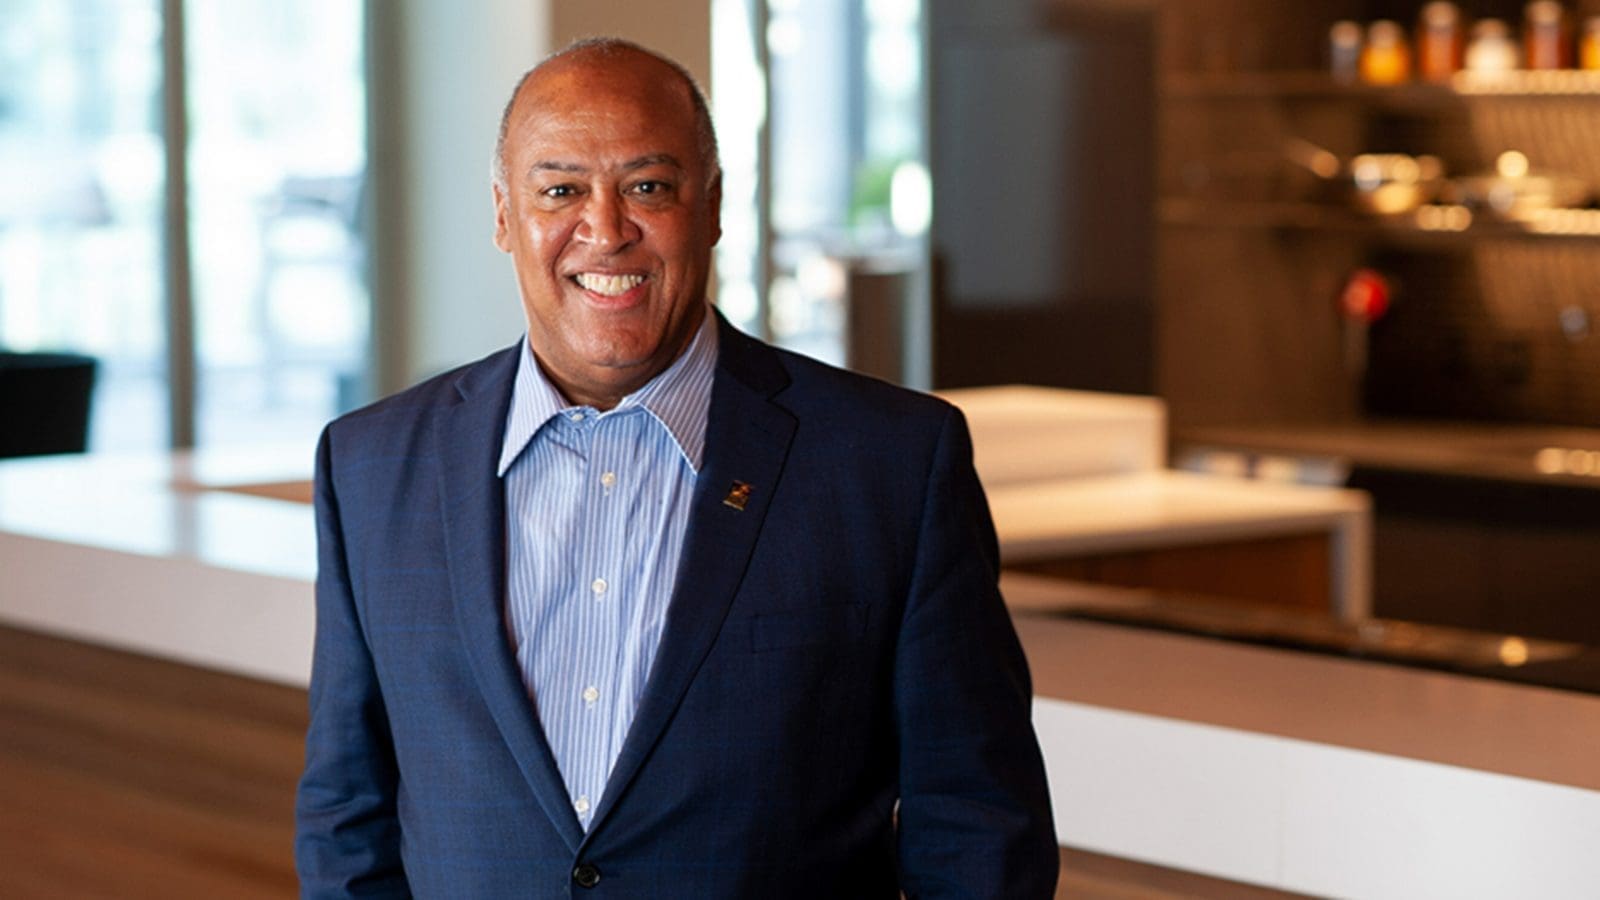 Multicultural Foodservice & Hospitality Alliance President Gerry A. Fernandez announces retirement, leaves legacy of diversity, inclusion